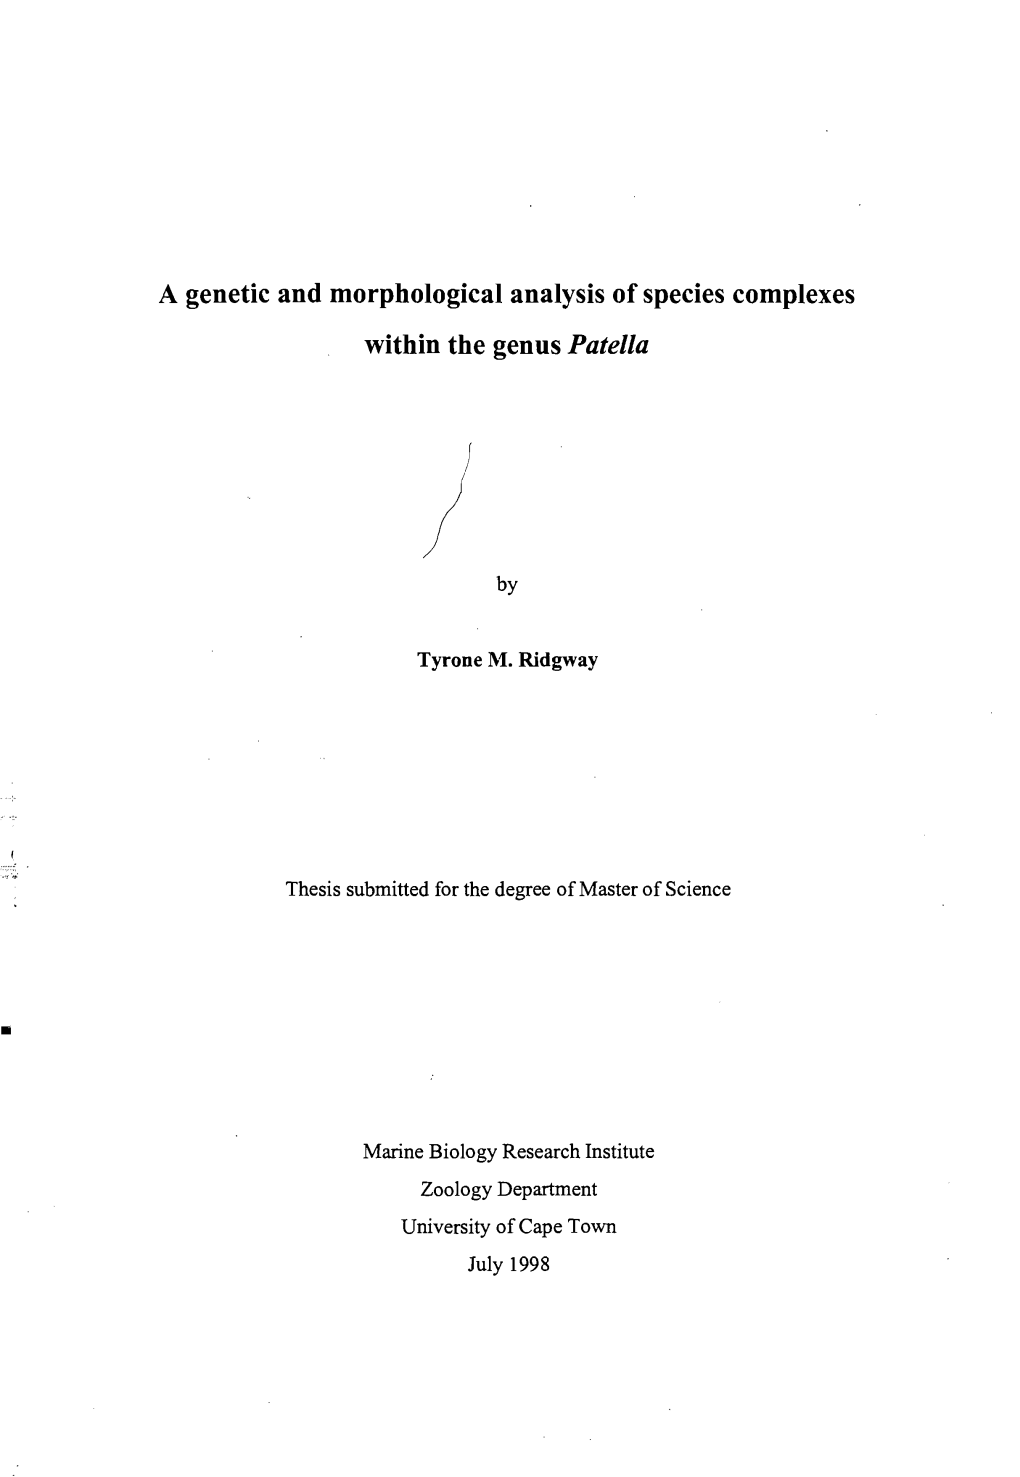 A Genetic and Morphological Analysis of Species Complexes Within the Genus Patella } by Town Tyrone 1\1